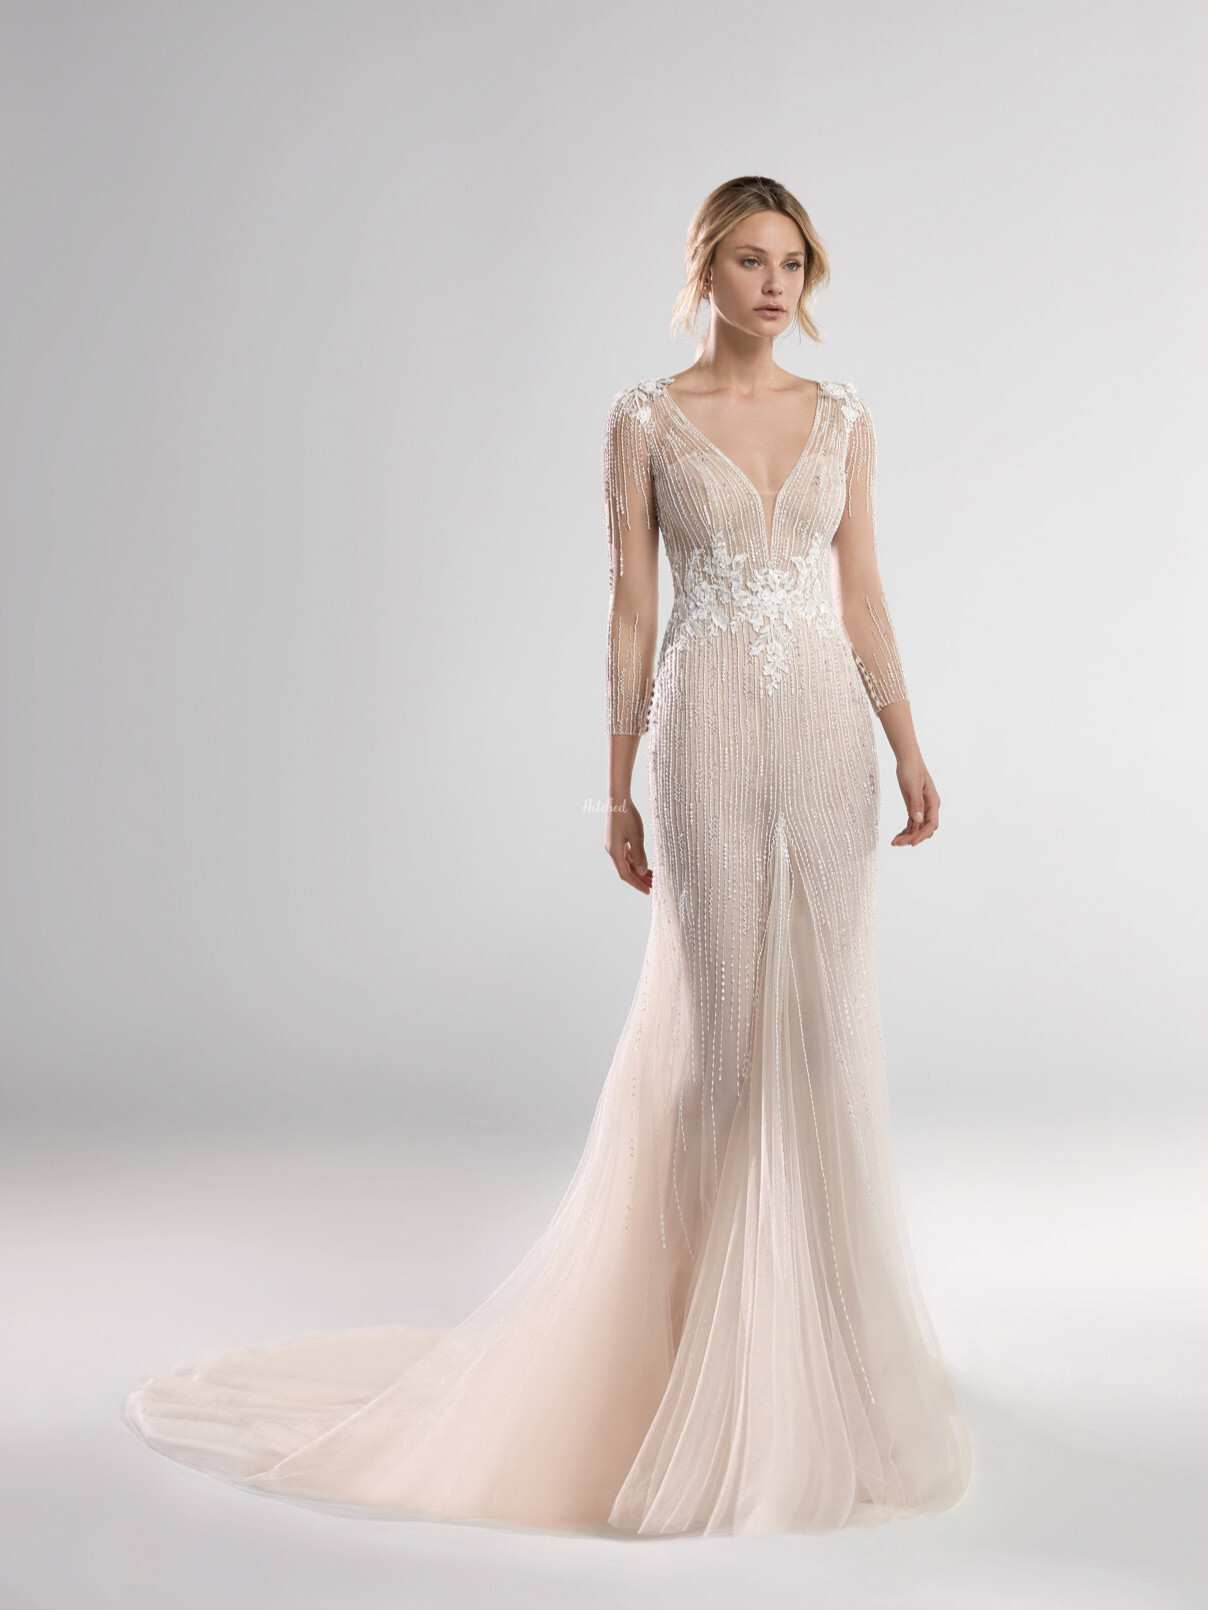 NCA20411 Wedding Dress from Nicole Couture - hitched.co.uk